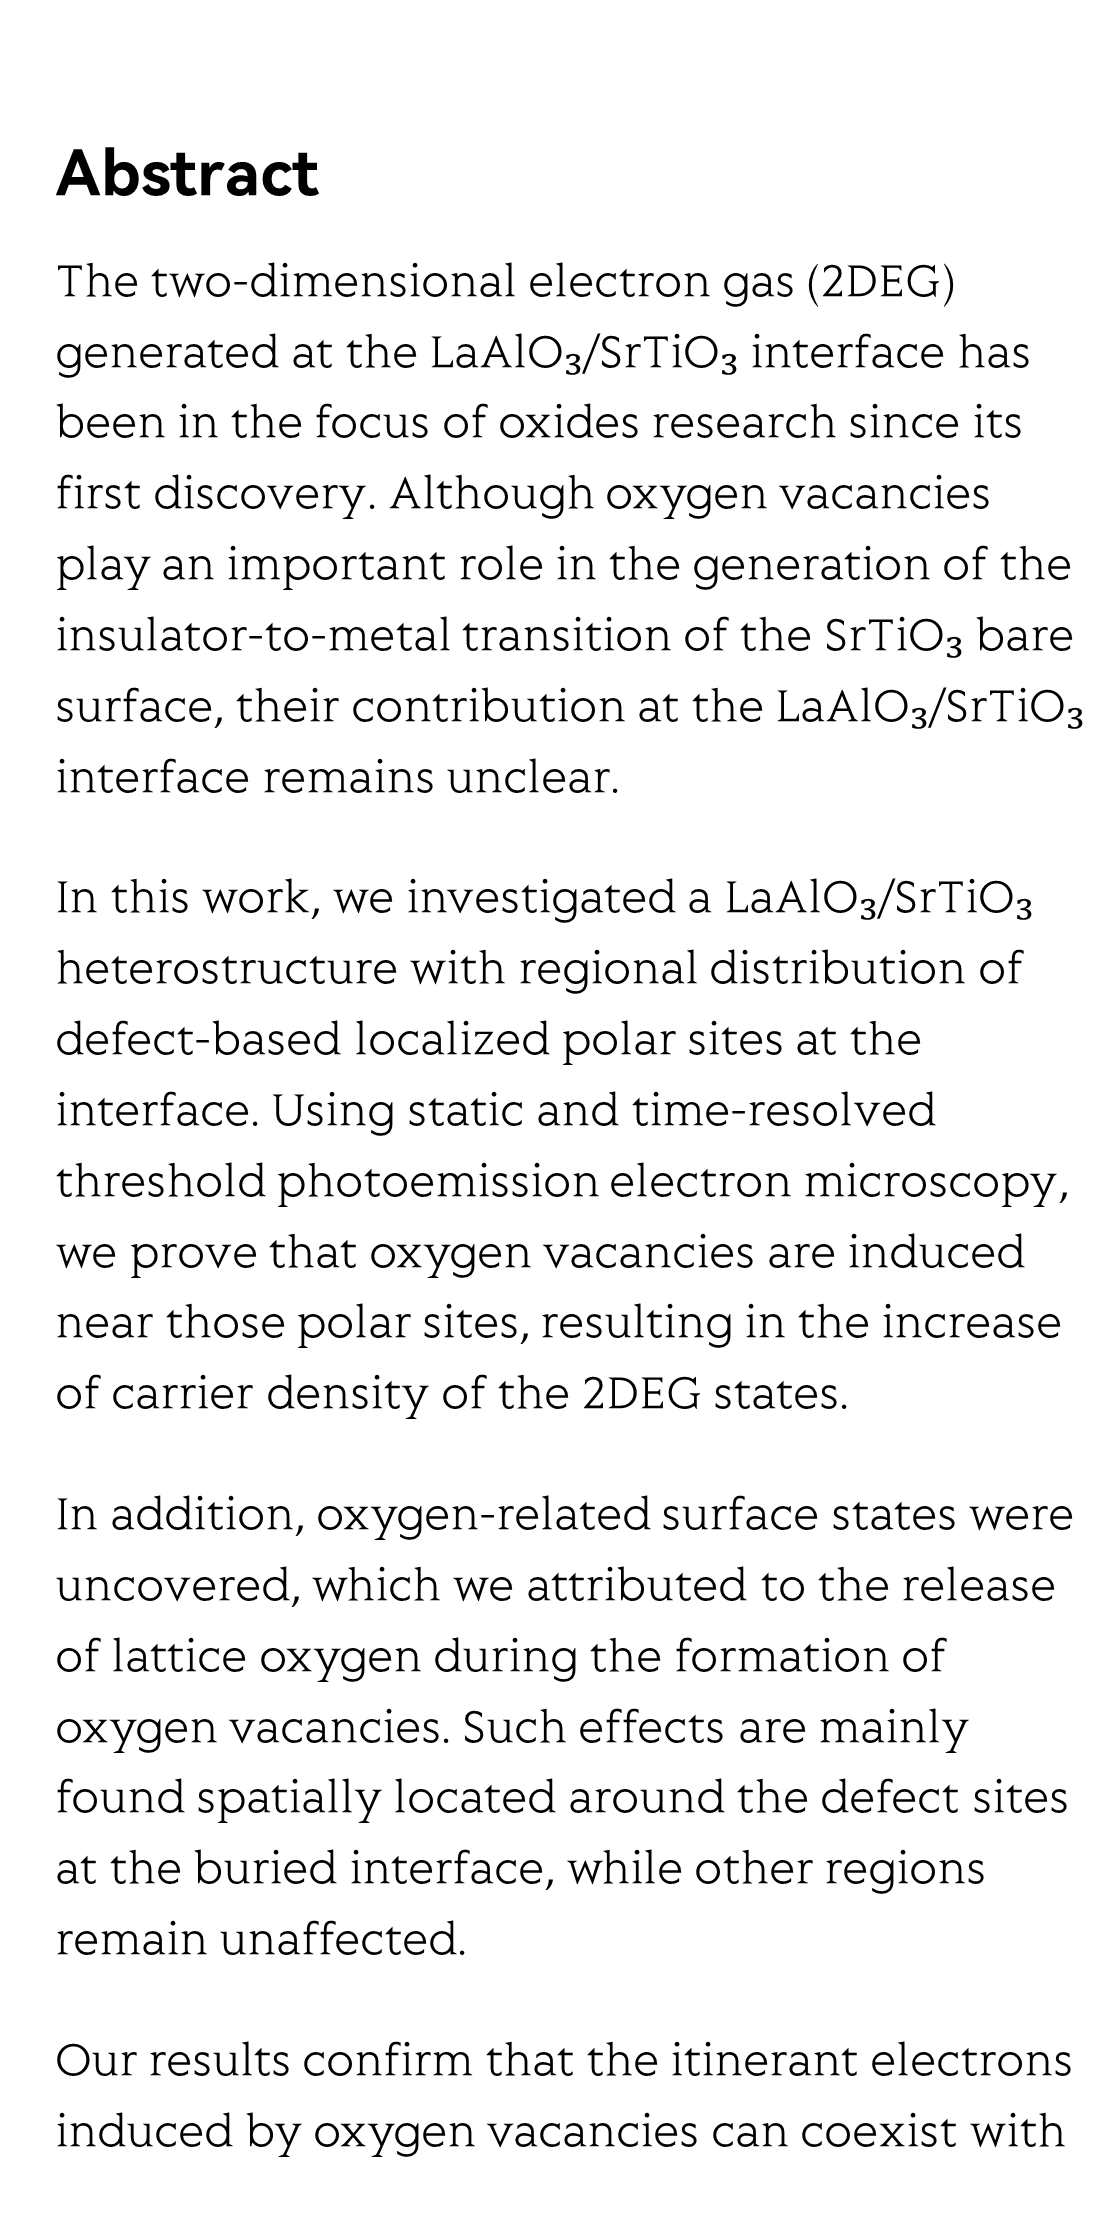 Tracing the formation of oxygen vacancies at the conductive LaAlO₃/SrTiO₃ interface via photoemission_2